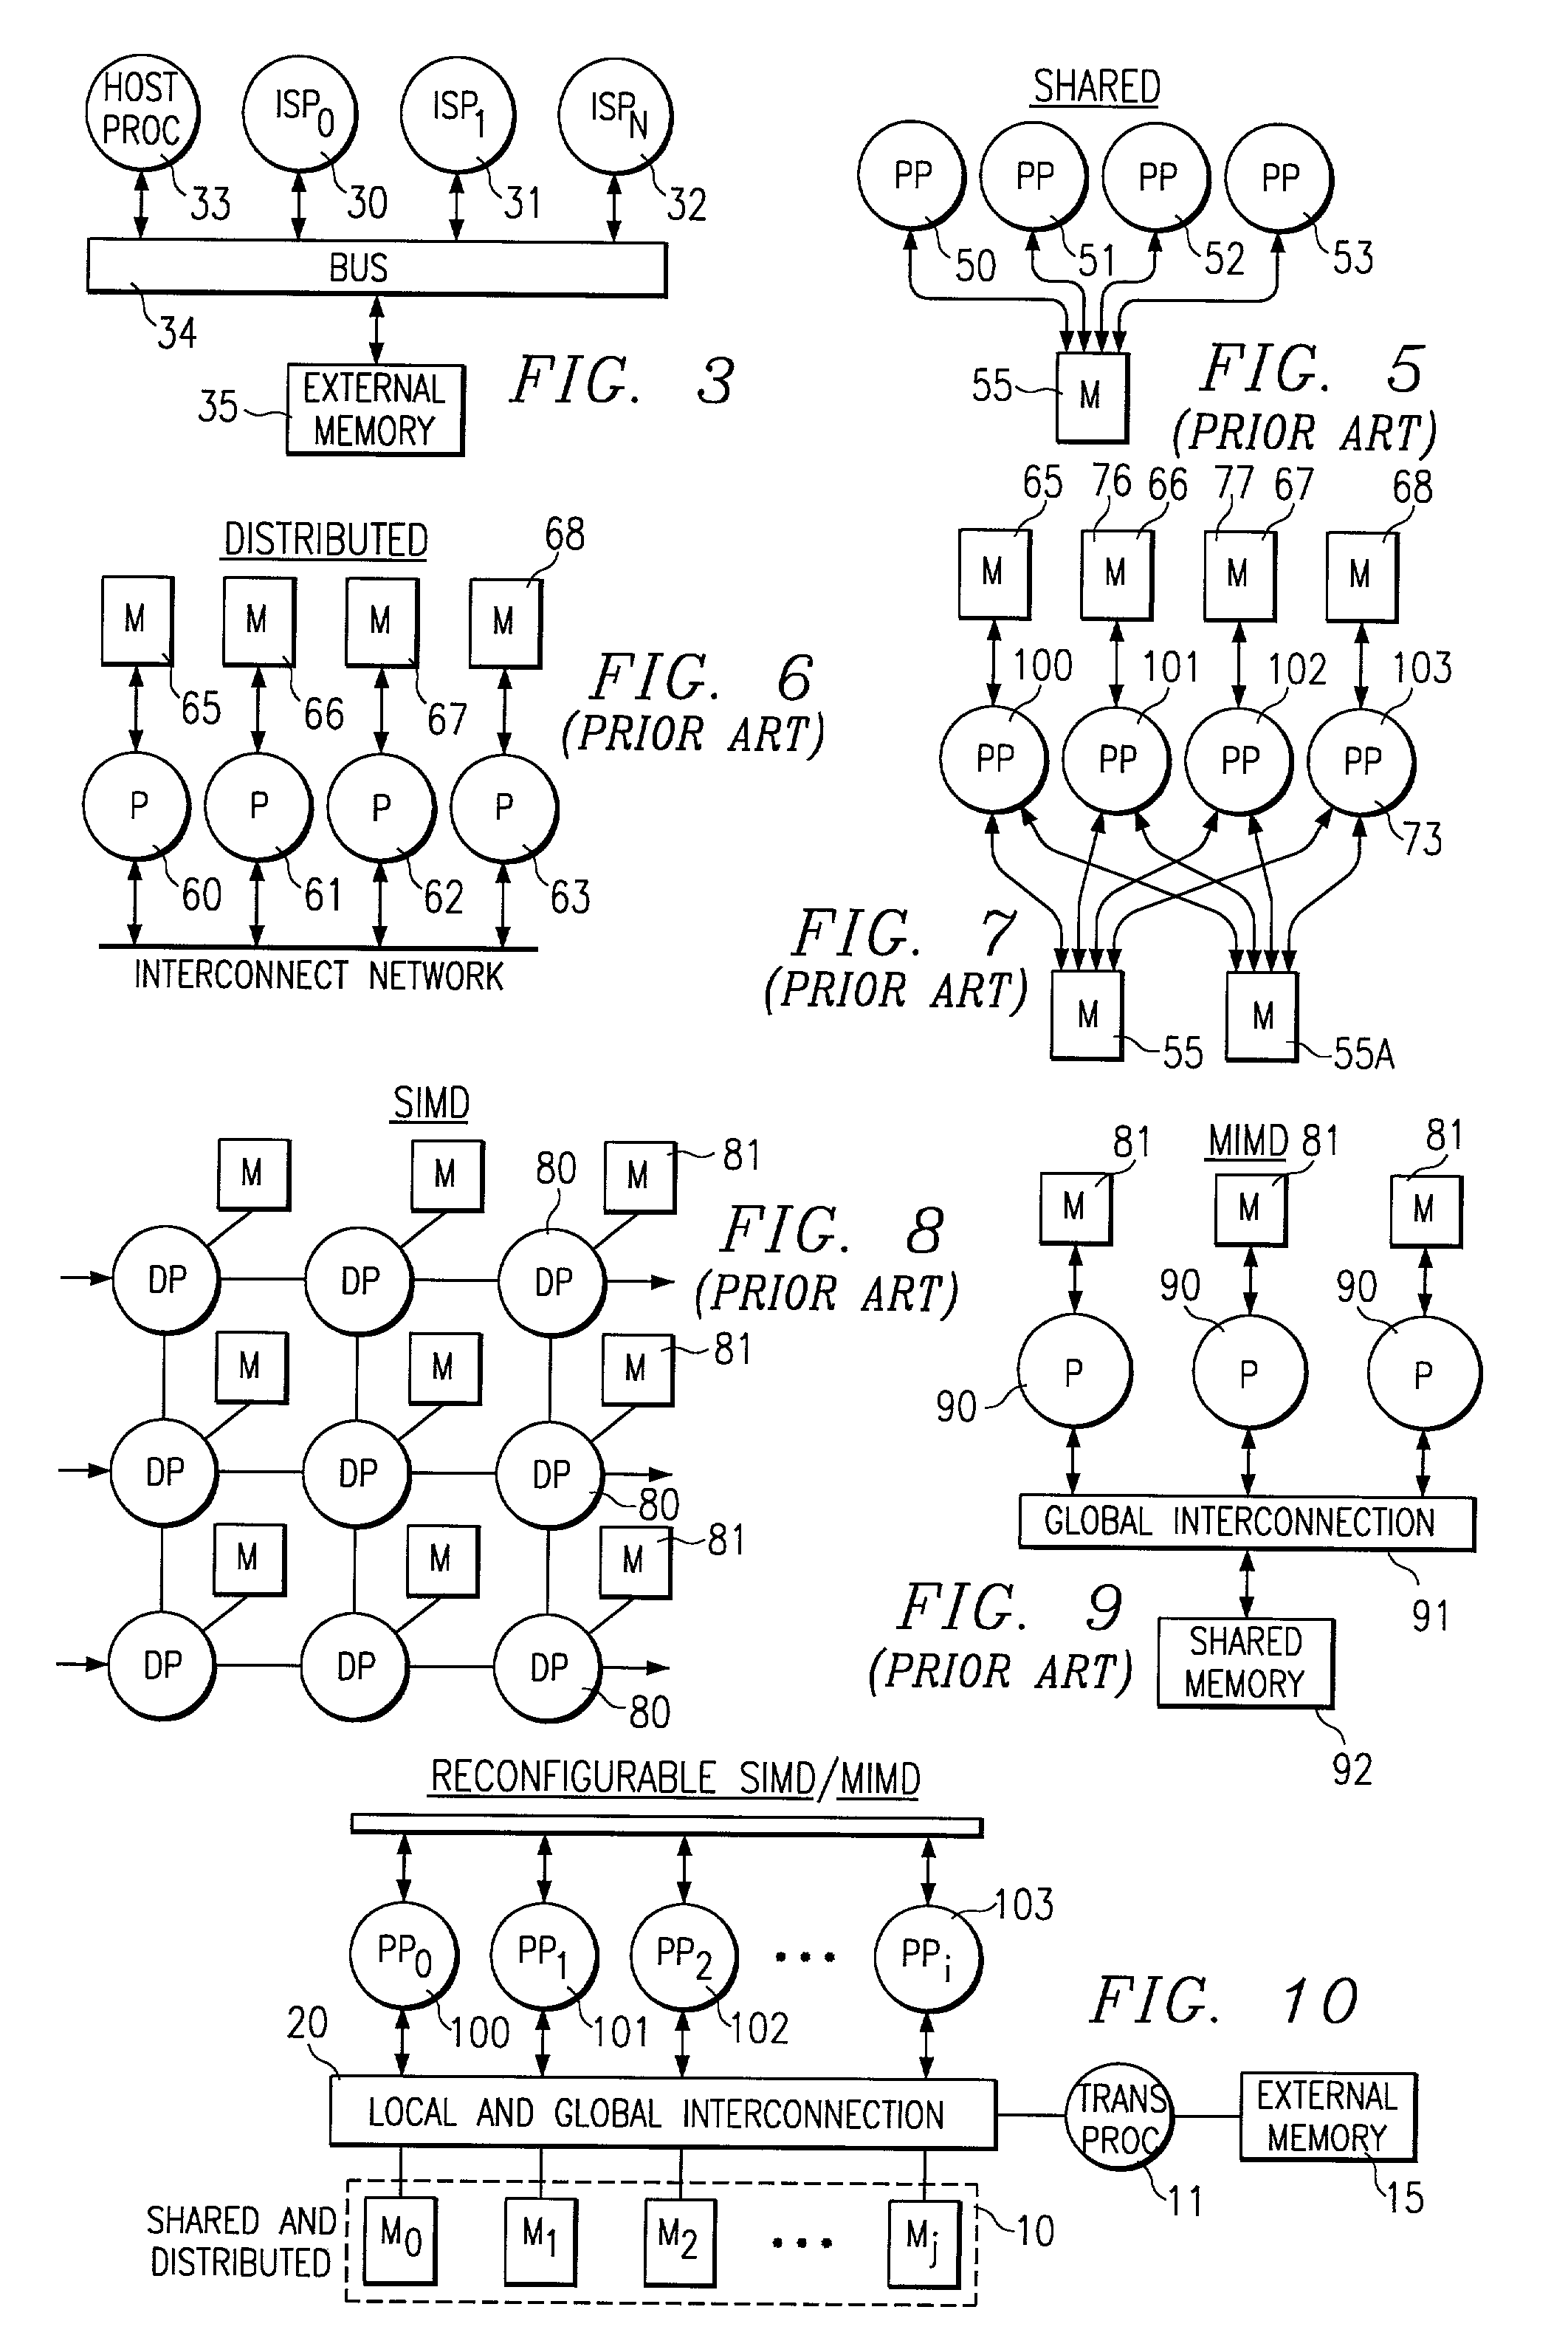 Single integrated circuit embodying a dual heterogenous processors with separate instruction handling hardware